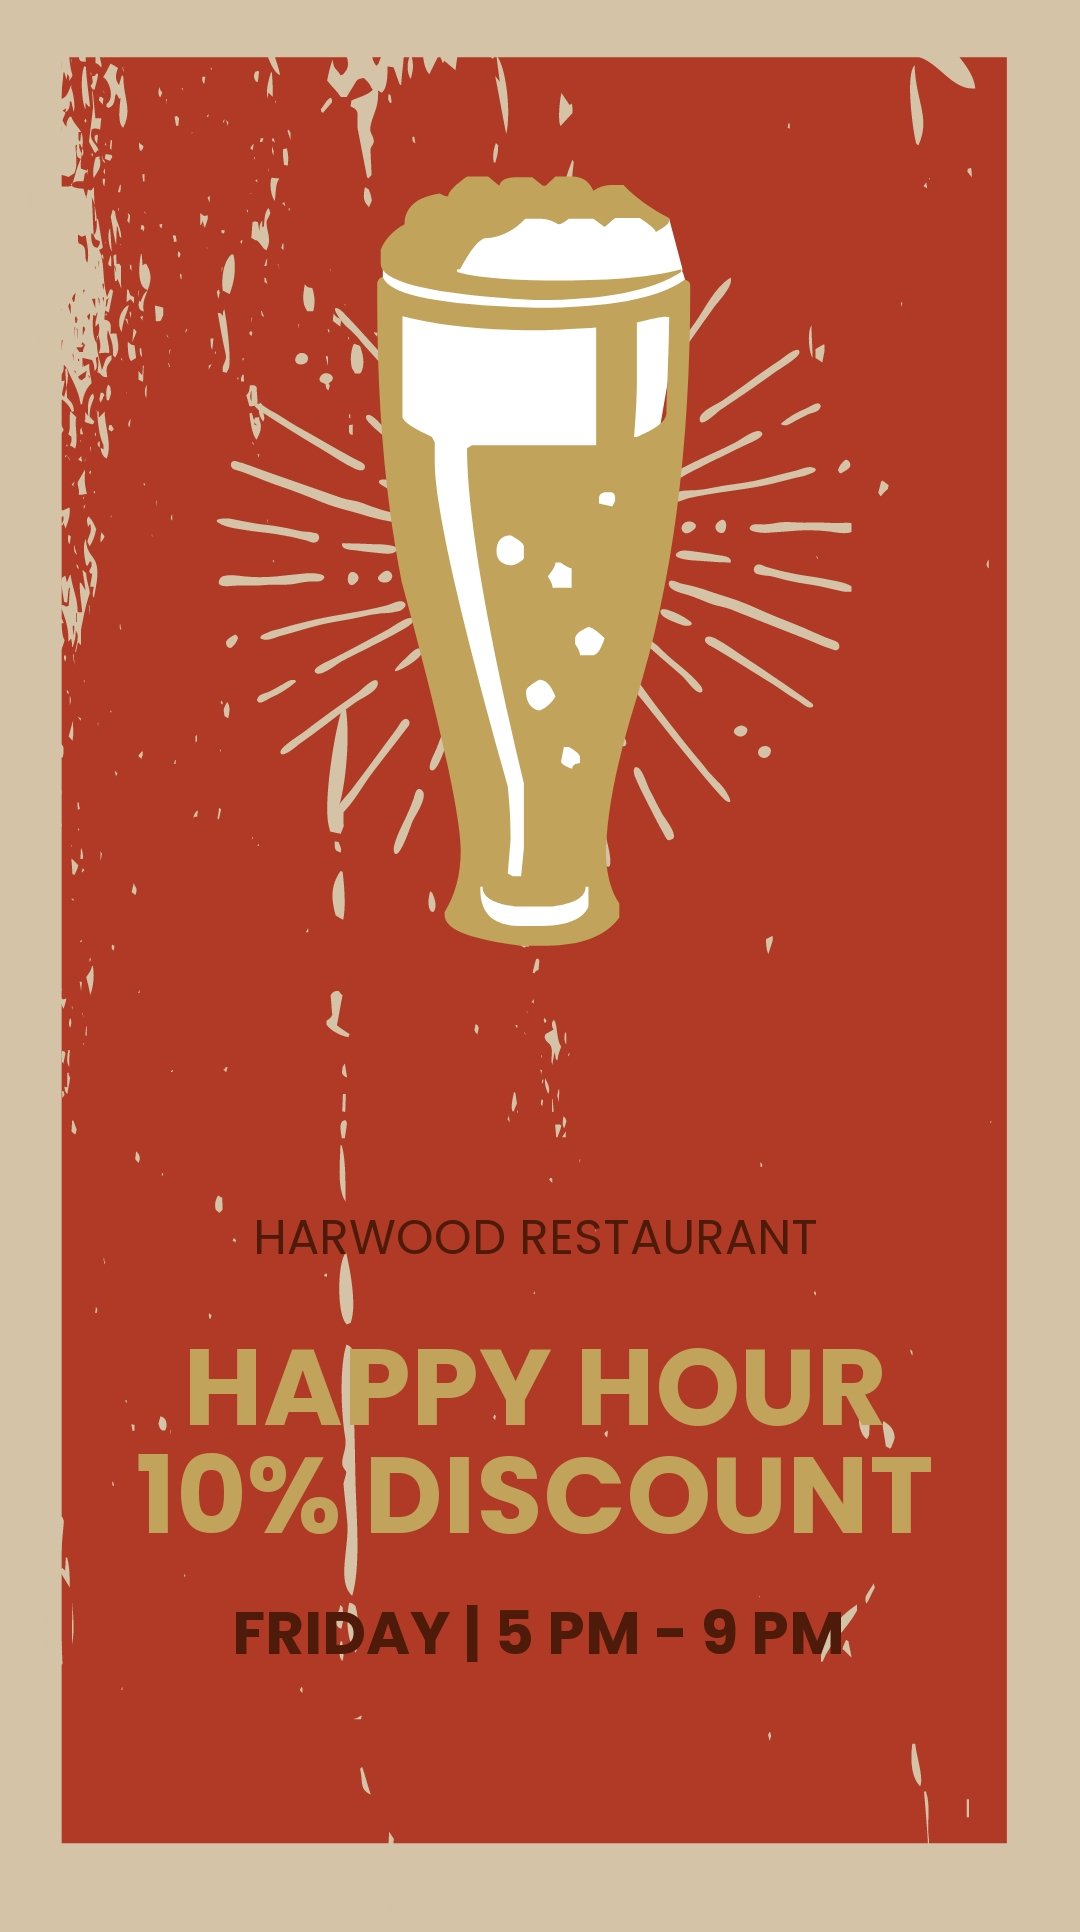 HAPPY HOUR Template